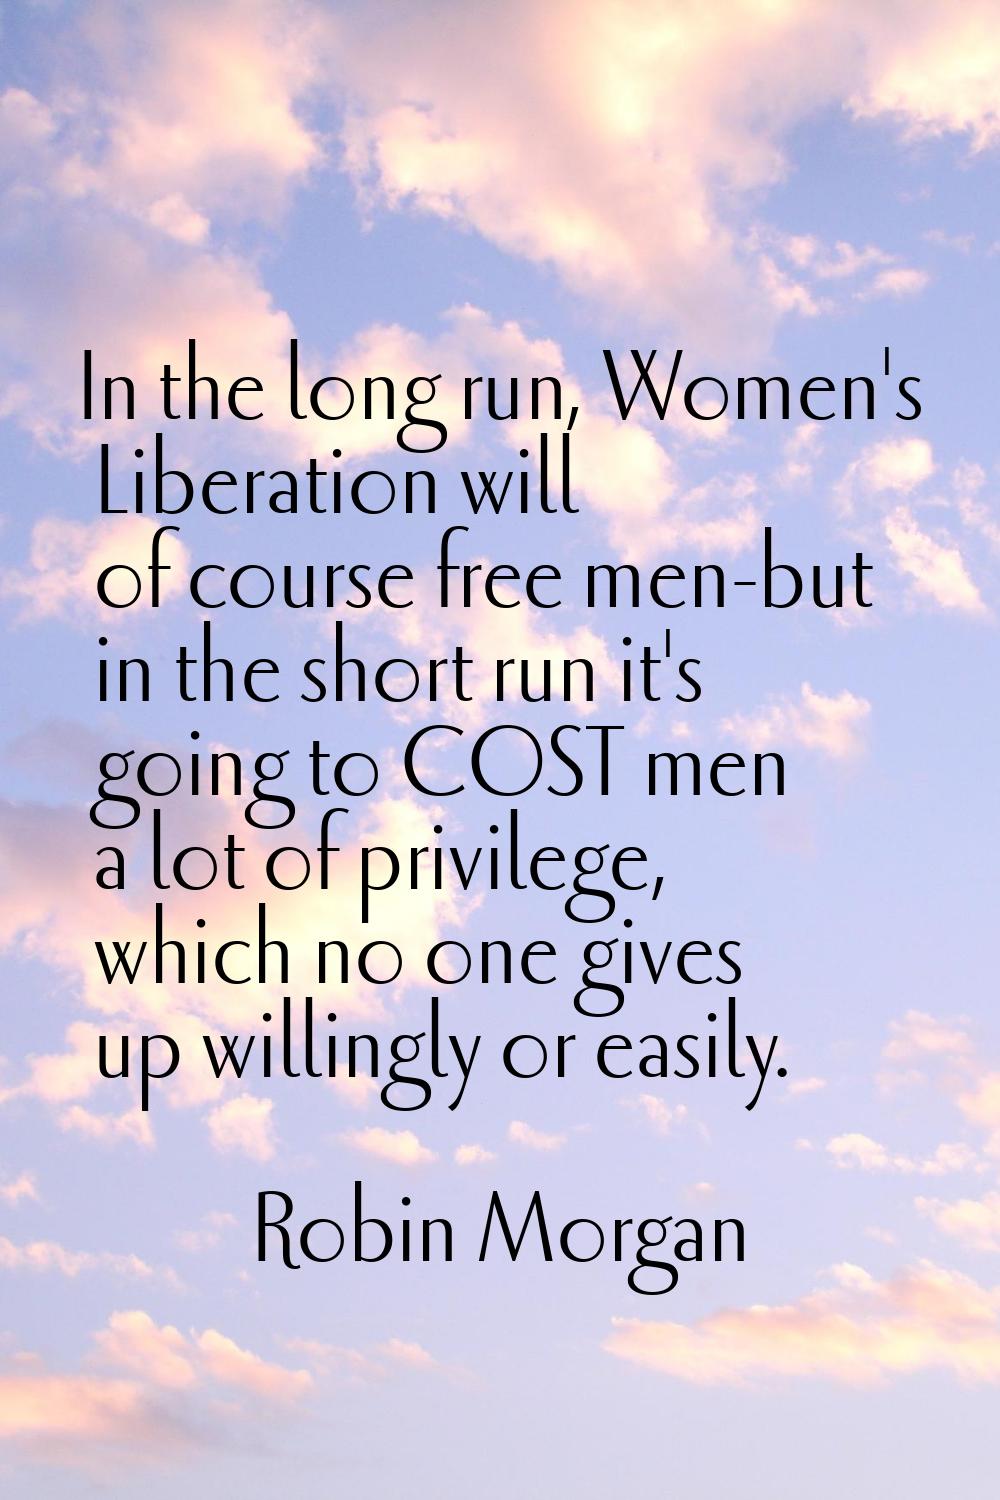 In the long run, Women's Liberation will of course free men-but in the short run it's going to COST